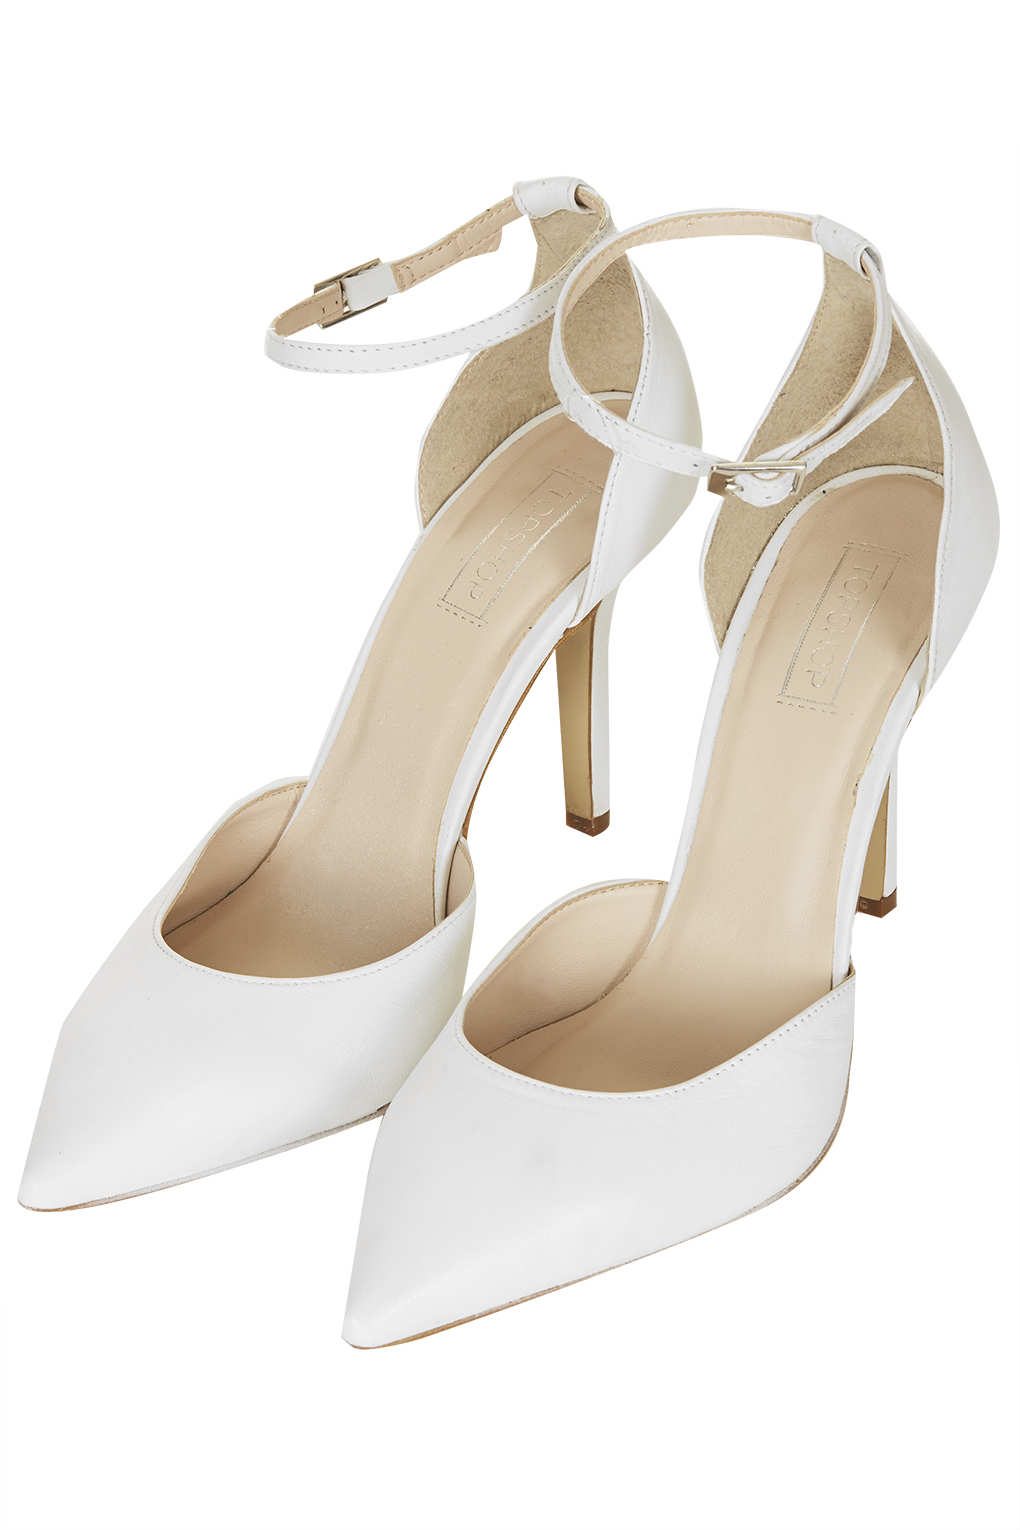 TOPSHOP Gizmo Ankle Strap Court Shoes 